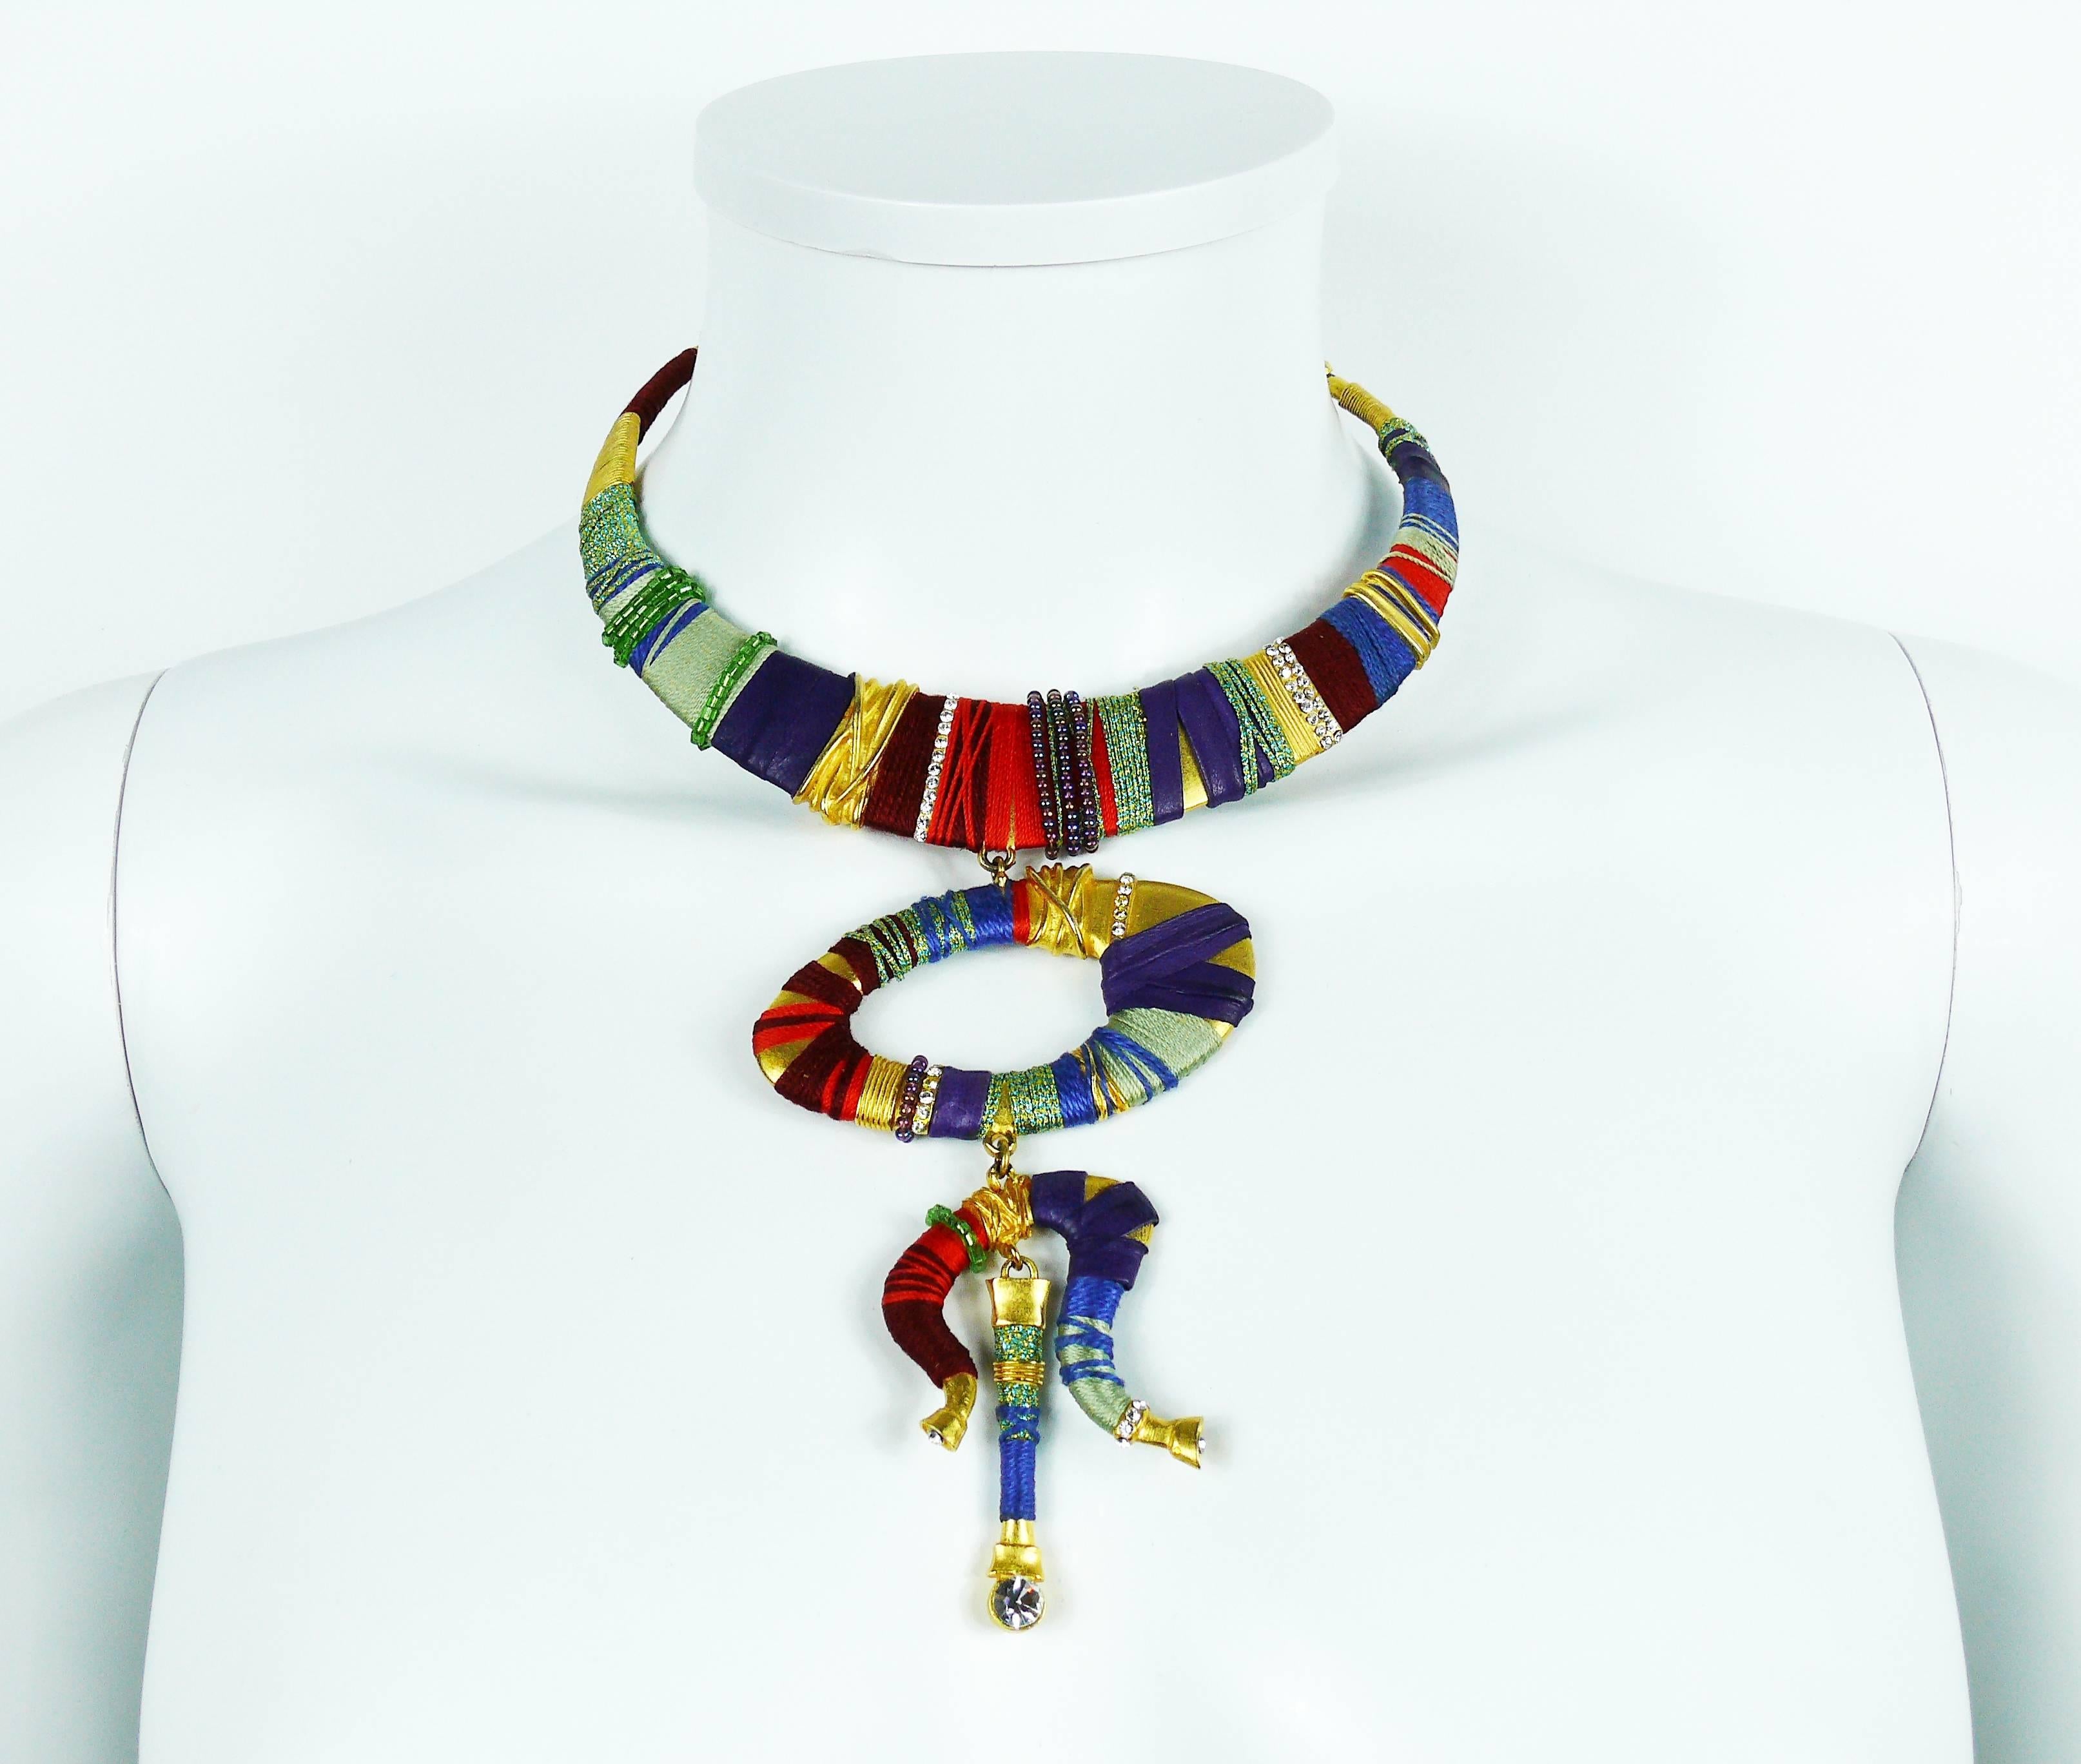 CHRISTIAN LACROIX vintage gorgeous and rare Masai inspired gold toned rigid torque bib necklace embellished with multicolored beads, fabrics, purple leather and clear crystals.

Marked CHRISTIAN LACROIX CL Made in France.

Indicative measurements :